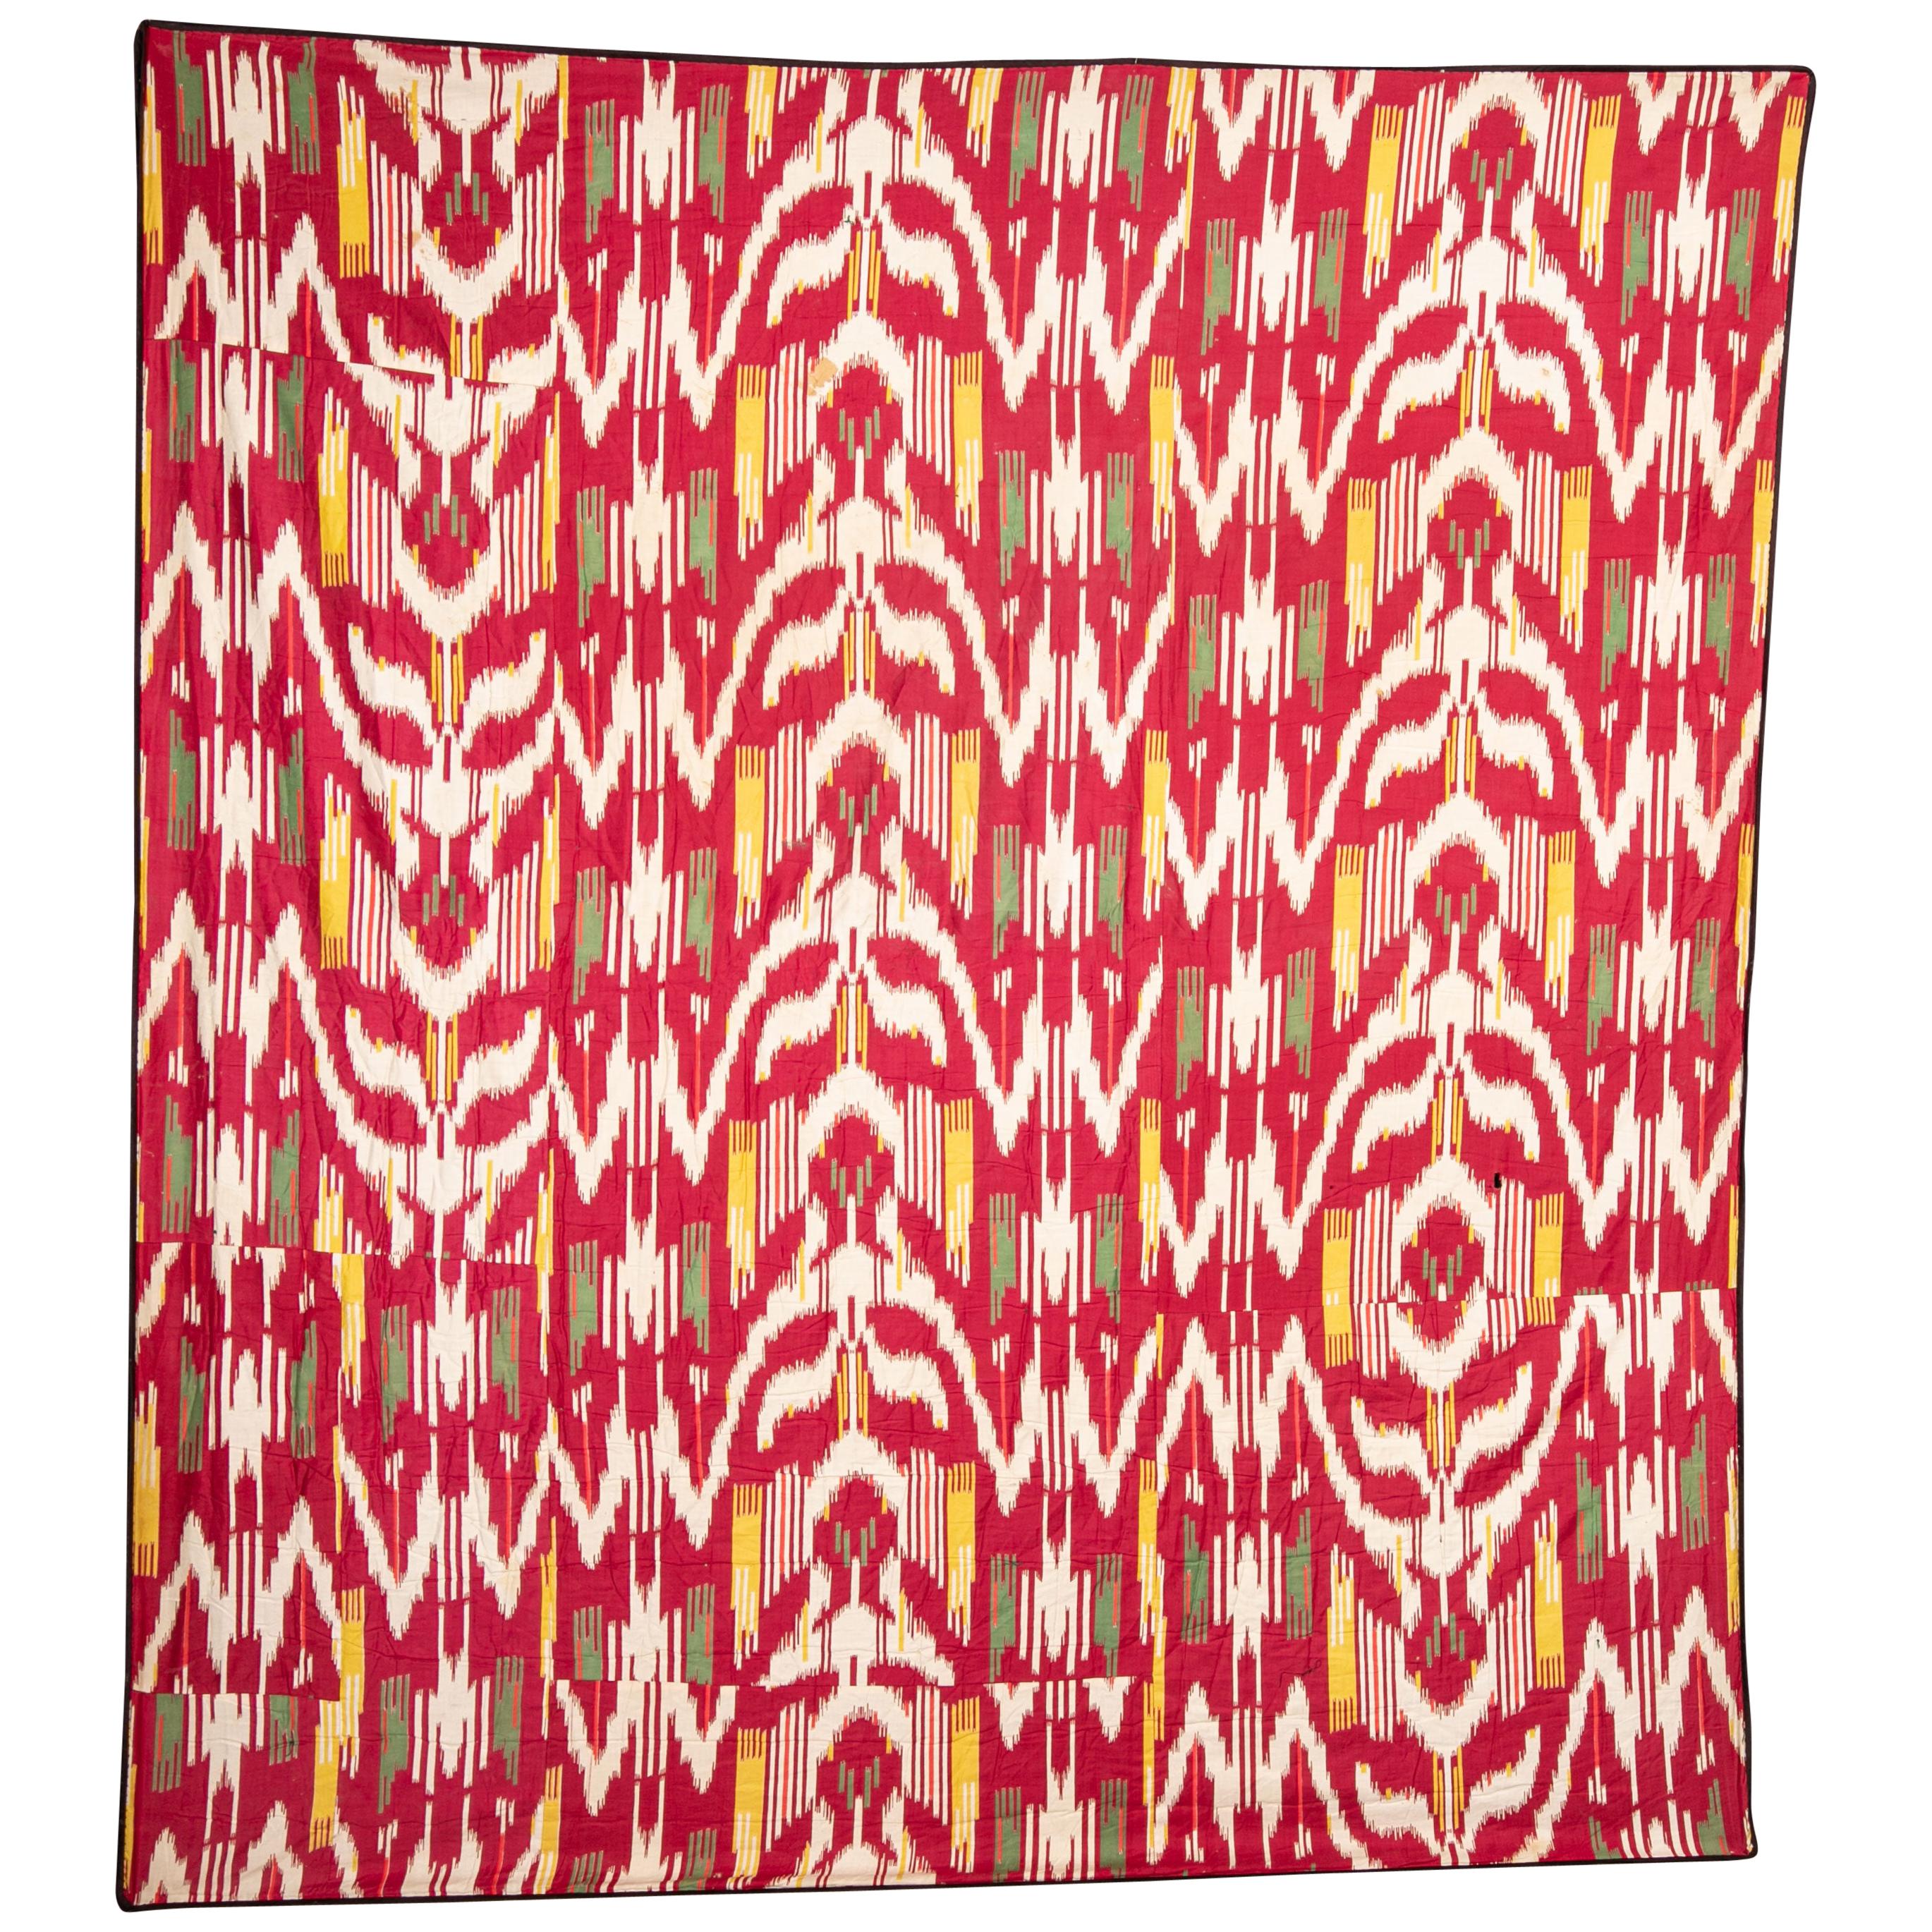 Russian Printed Ikat Design Cotton Fabric Panel, Mid-20th Century or Earlier For Sale